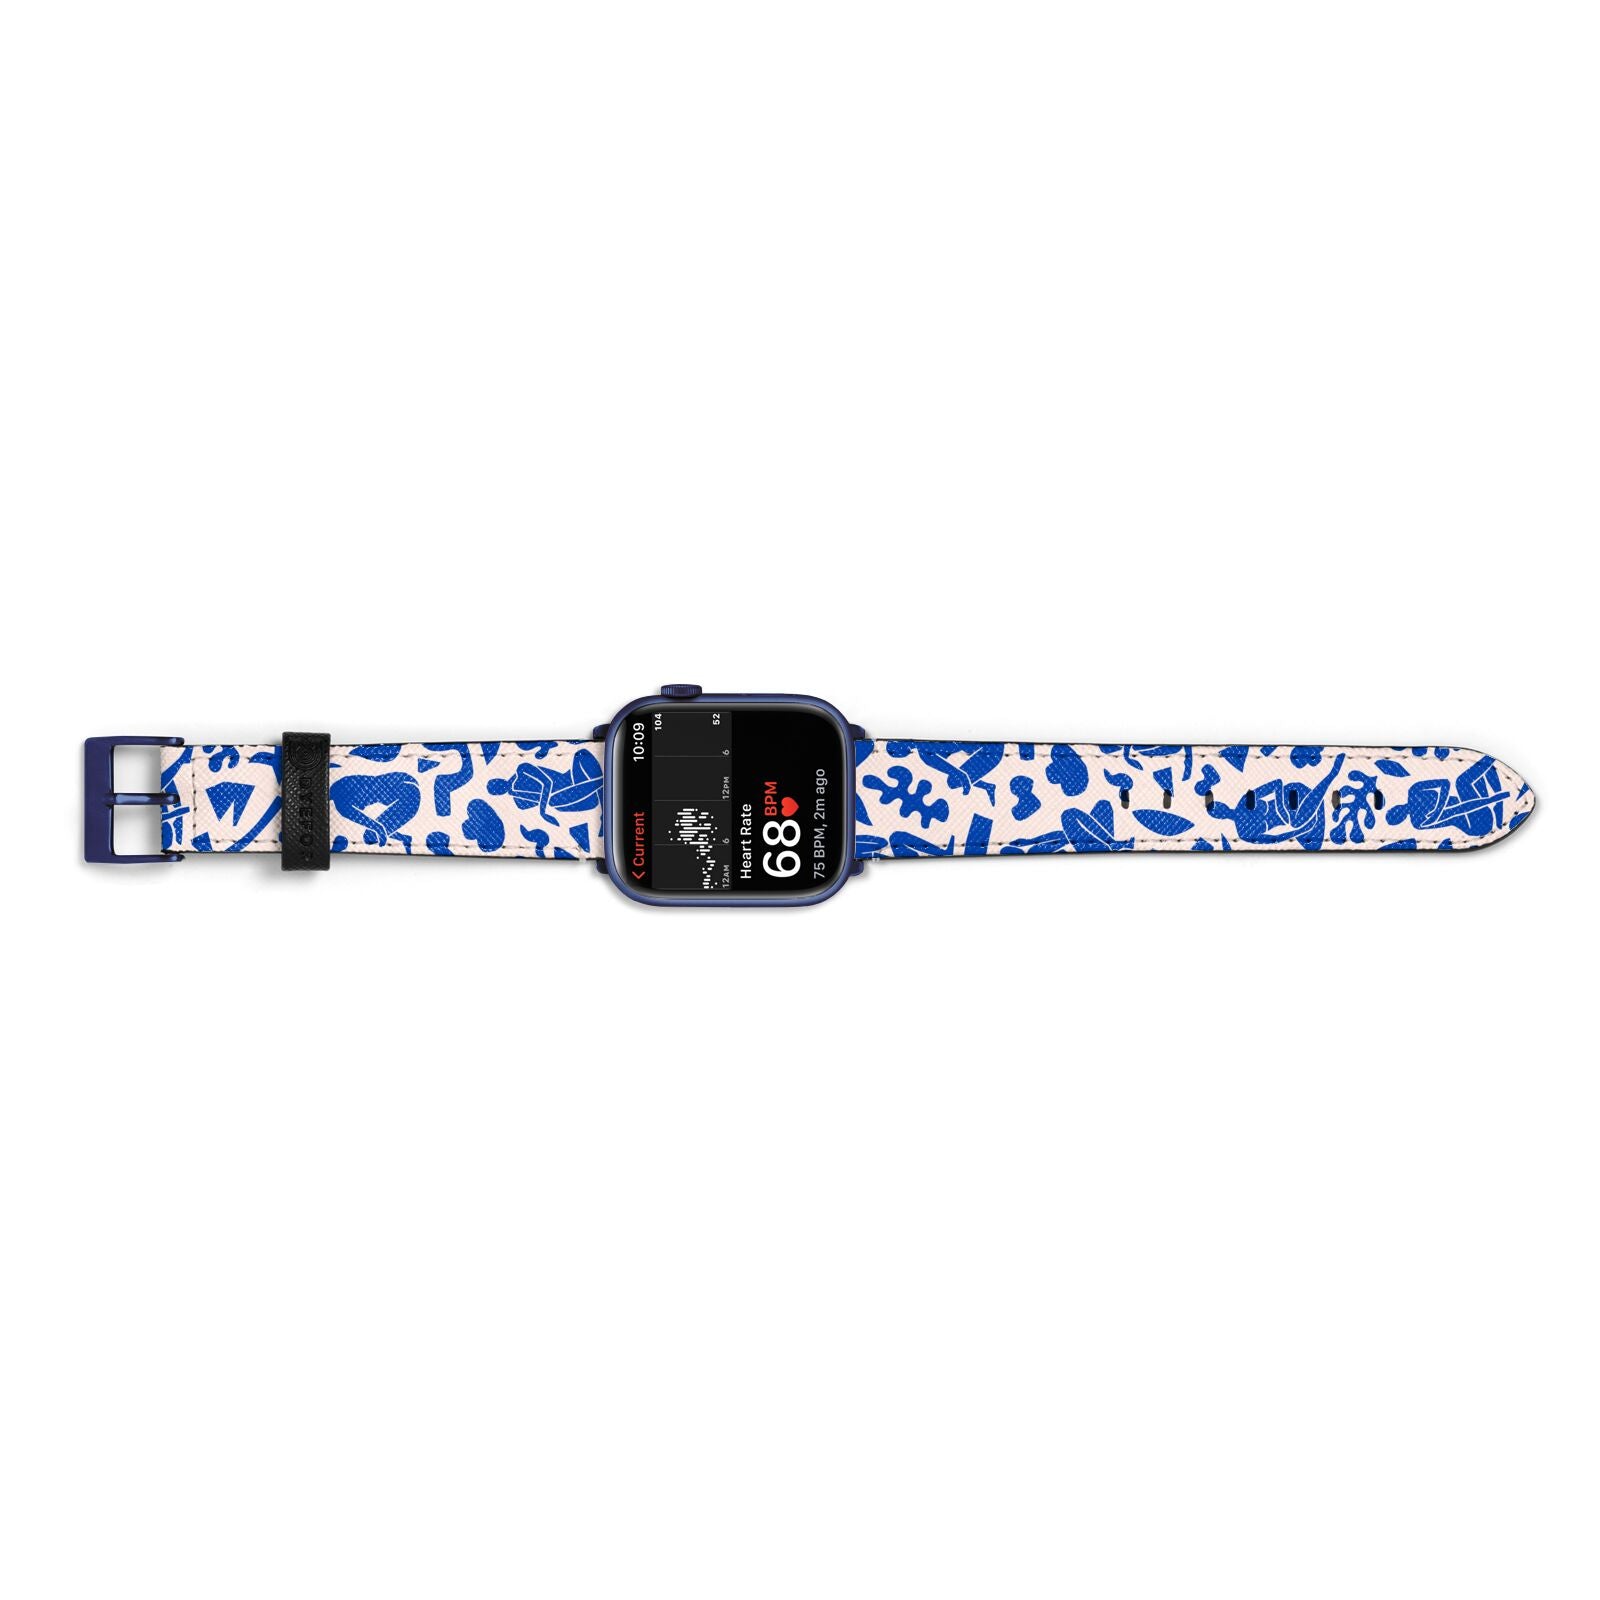 Abstract Art Apple Watch Strap Size 38mm Landscape Image Blue Hardware